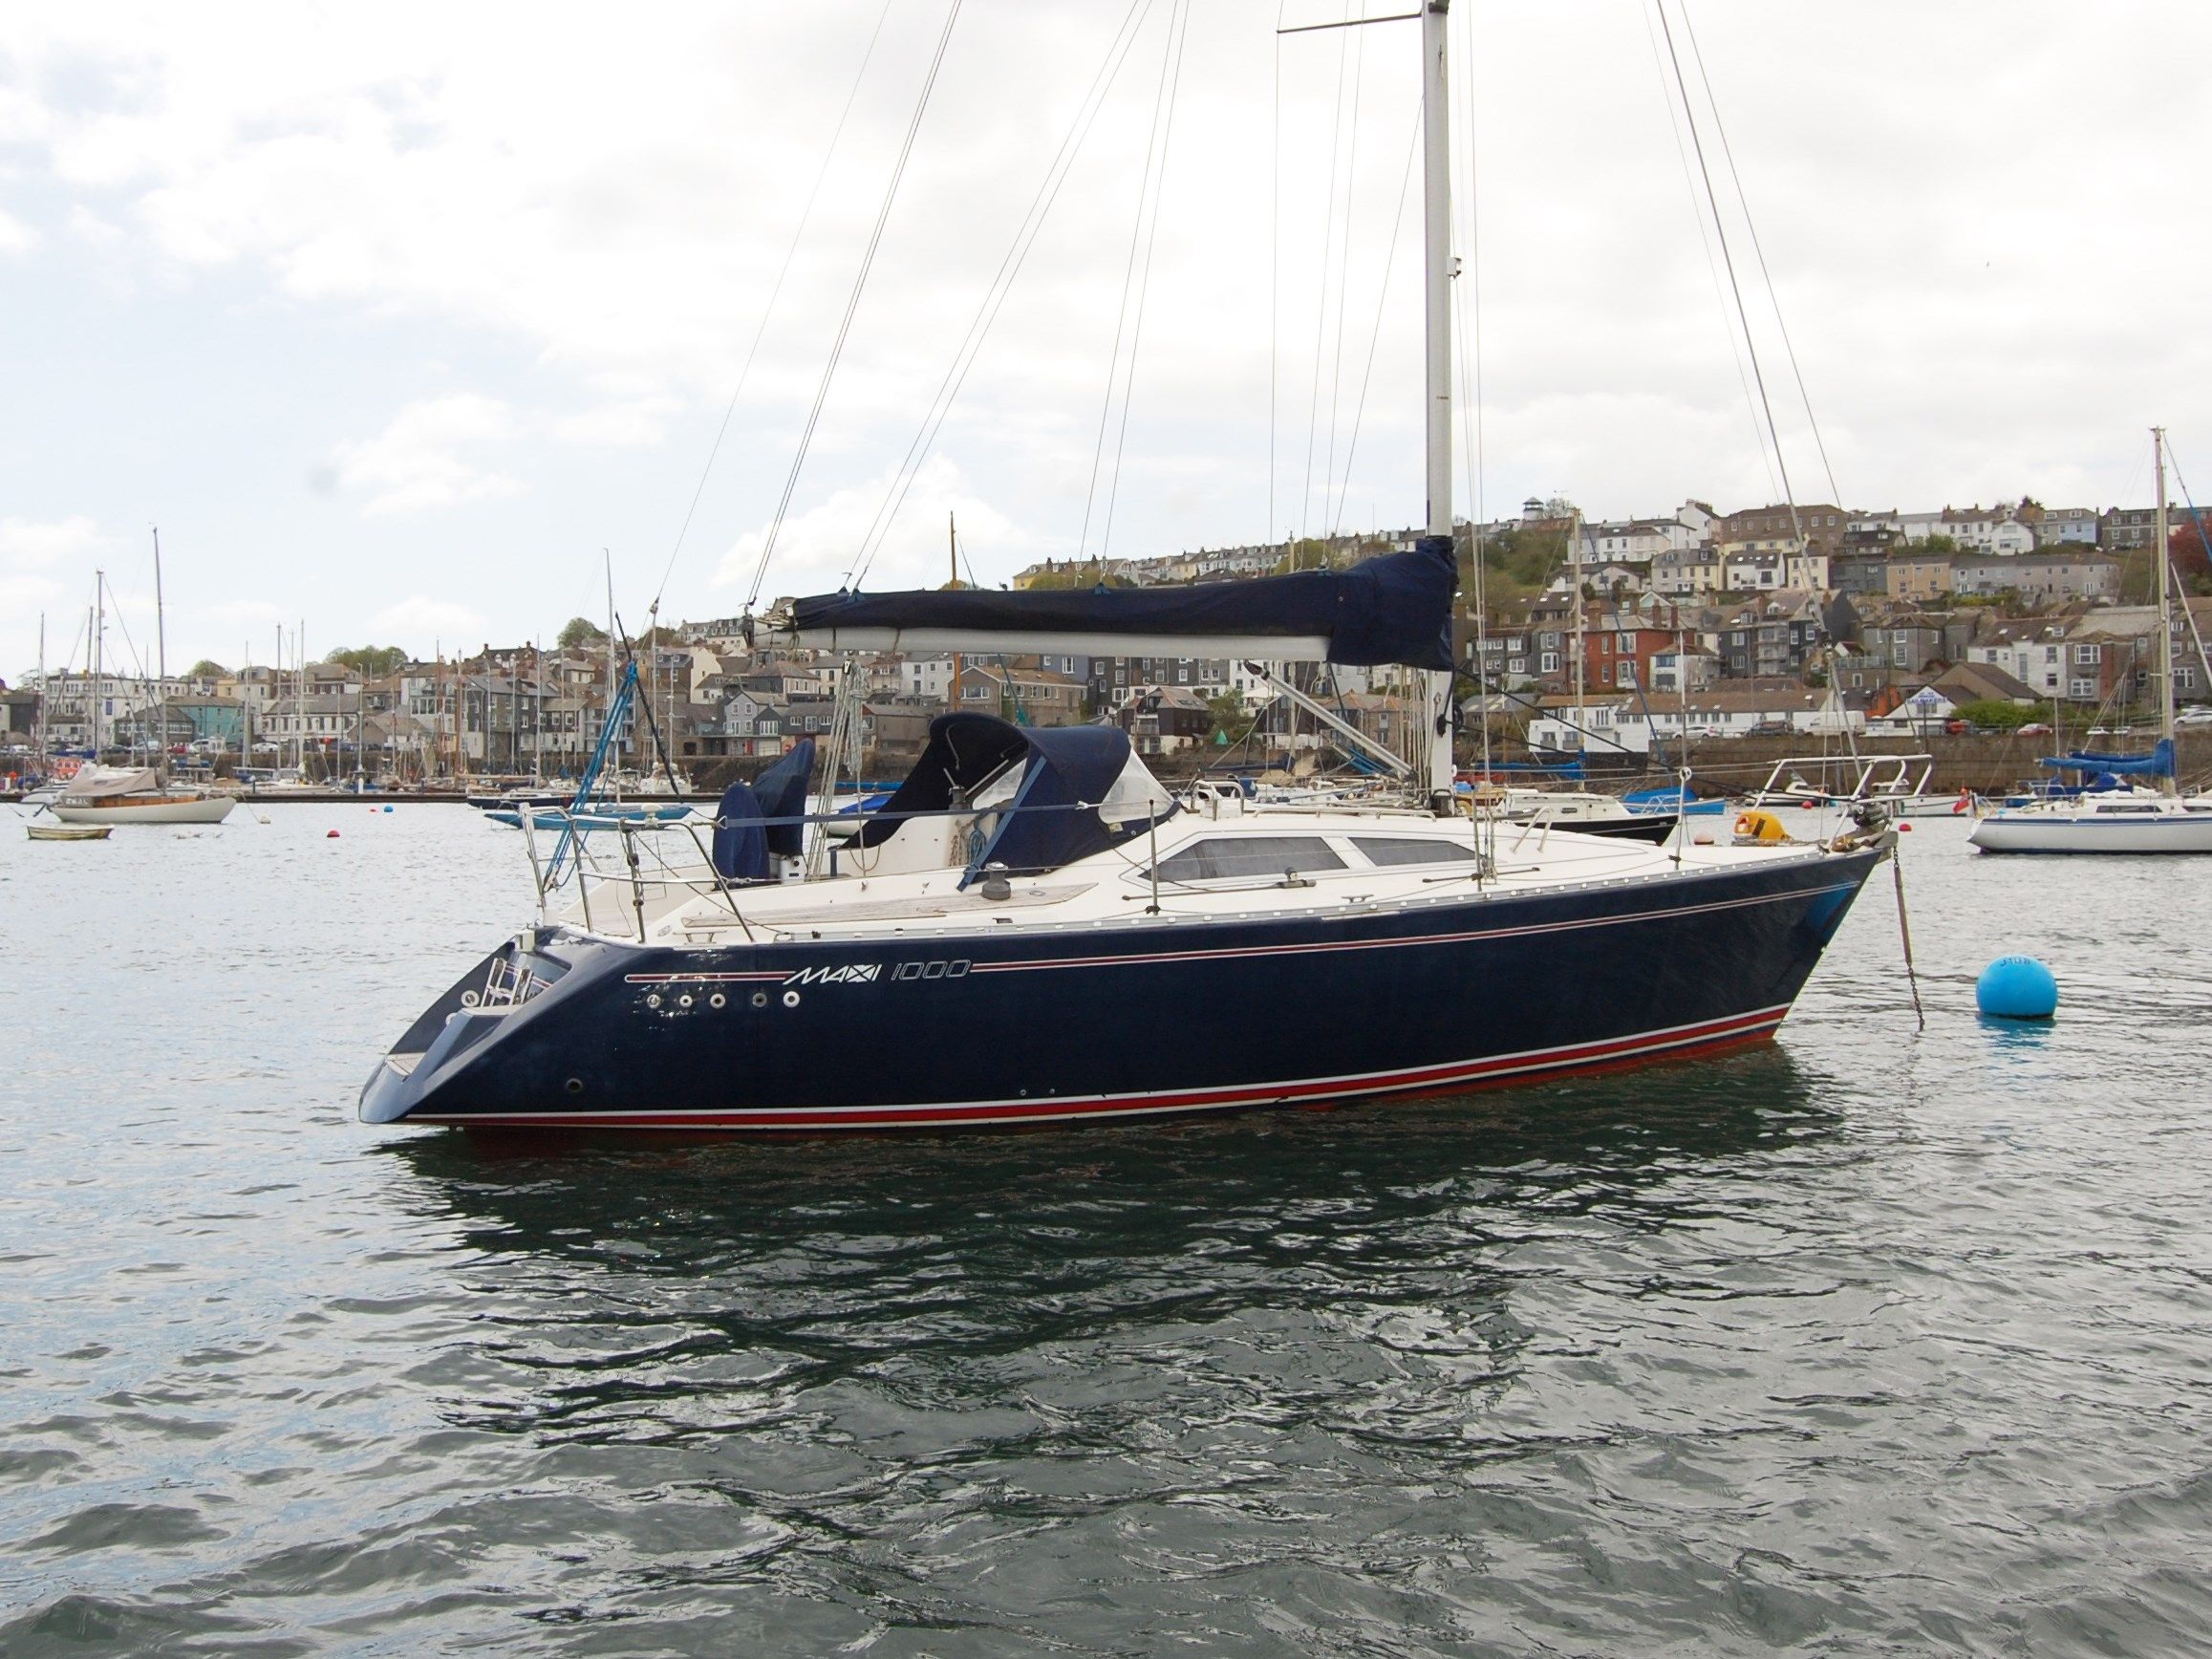 maxi yachts for sale uk